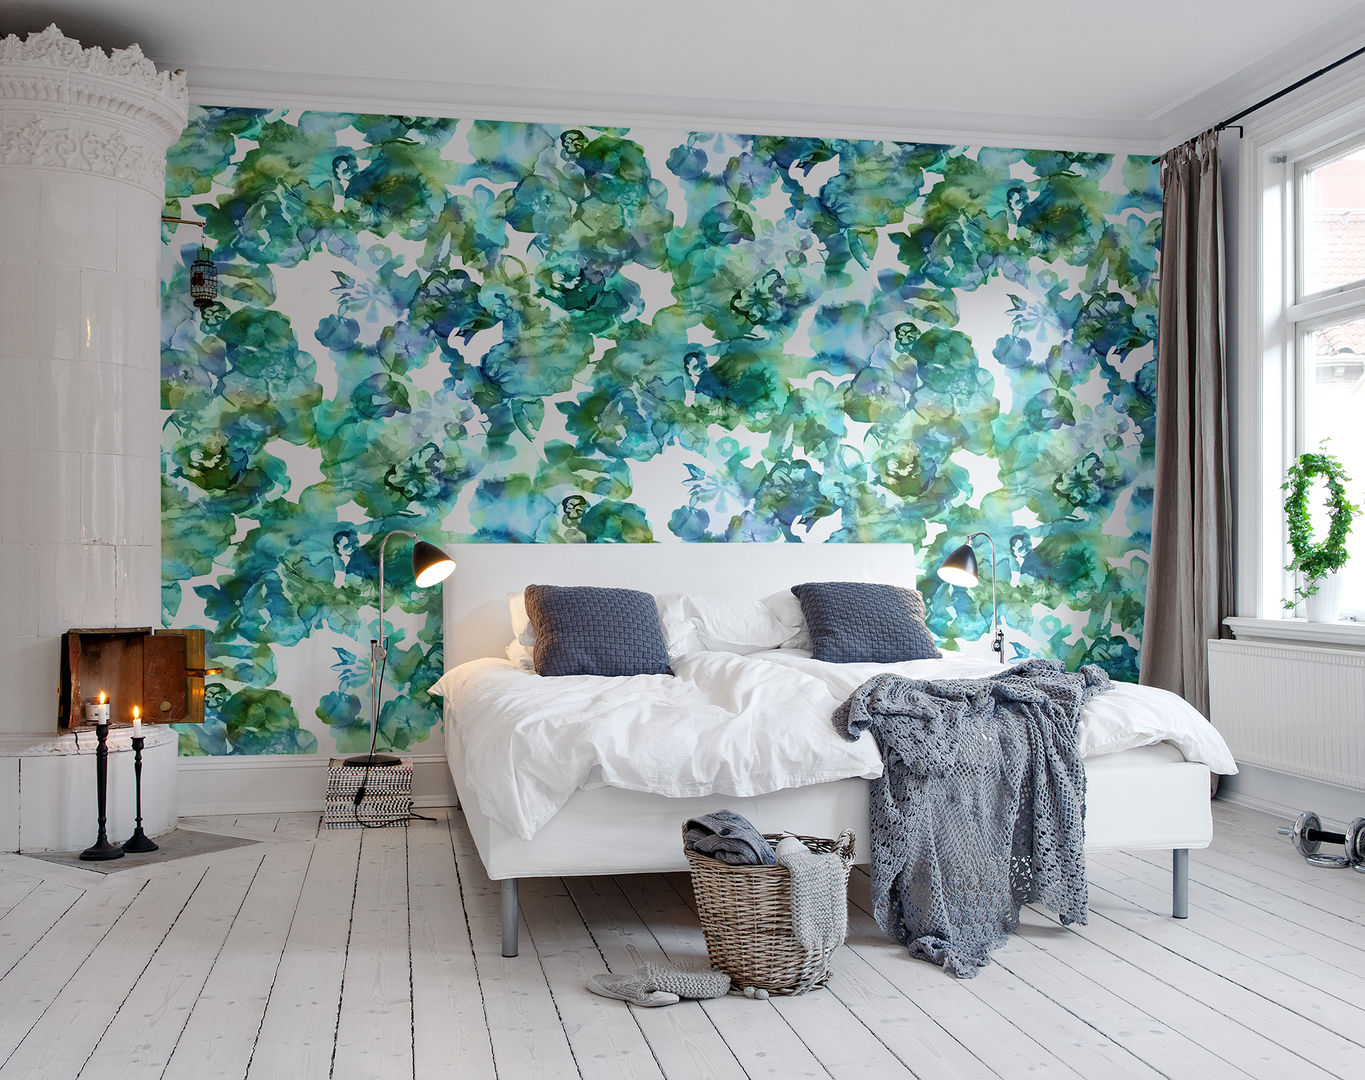 Lily Pond homify Scandinavian style walls & floors